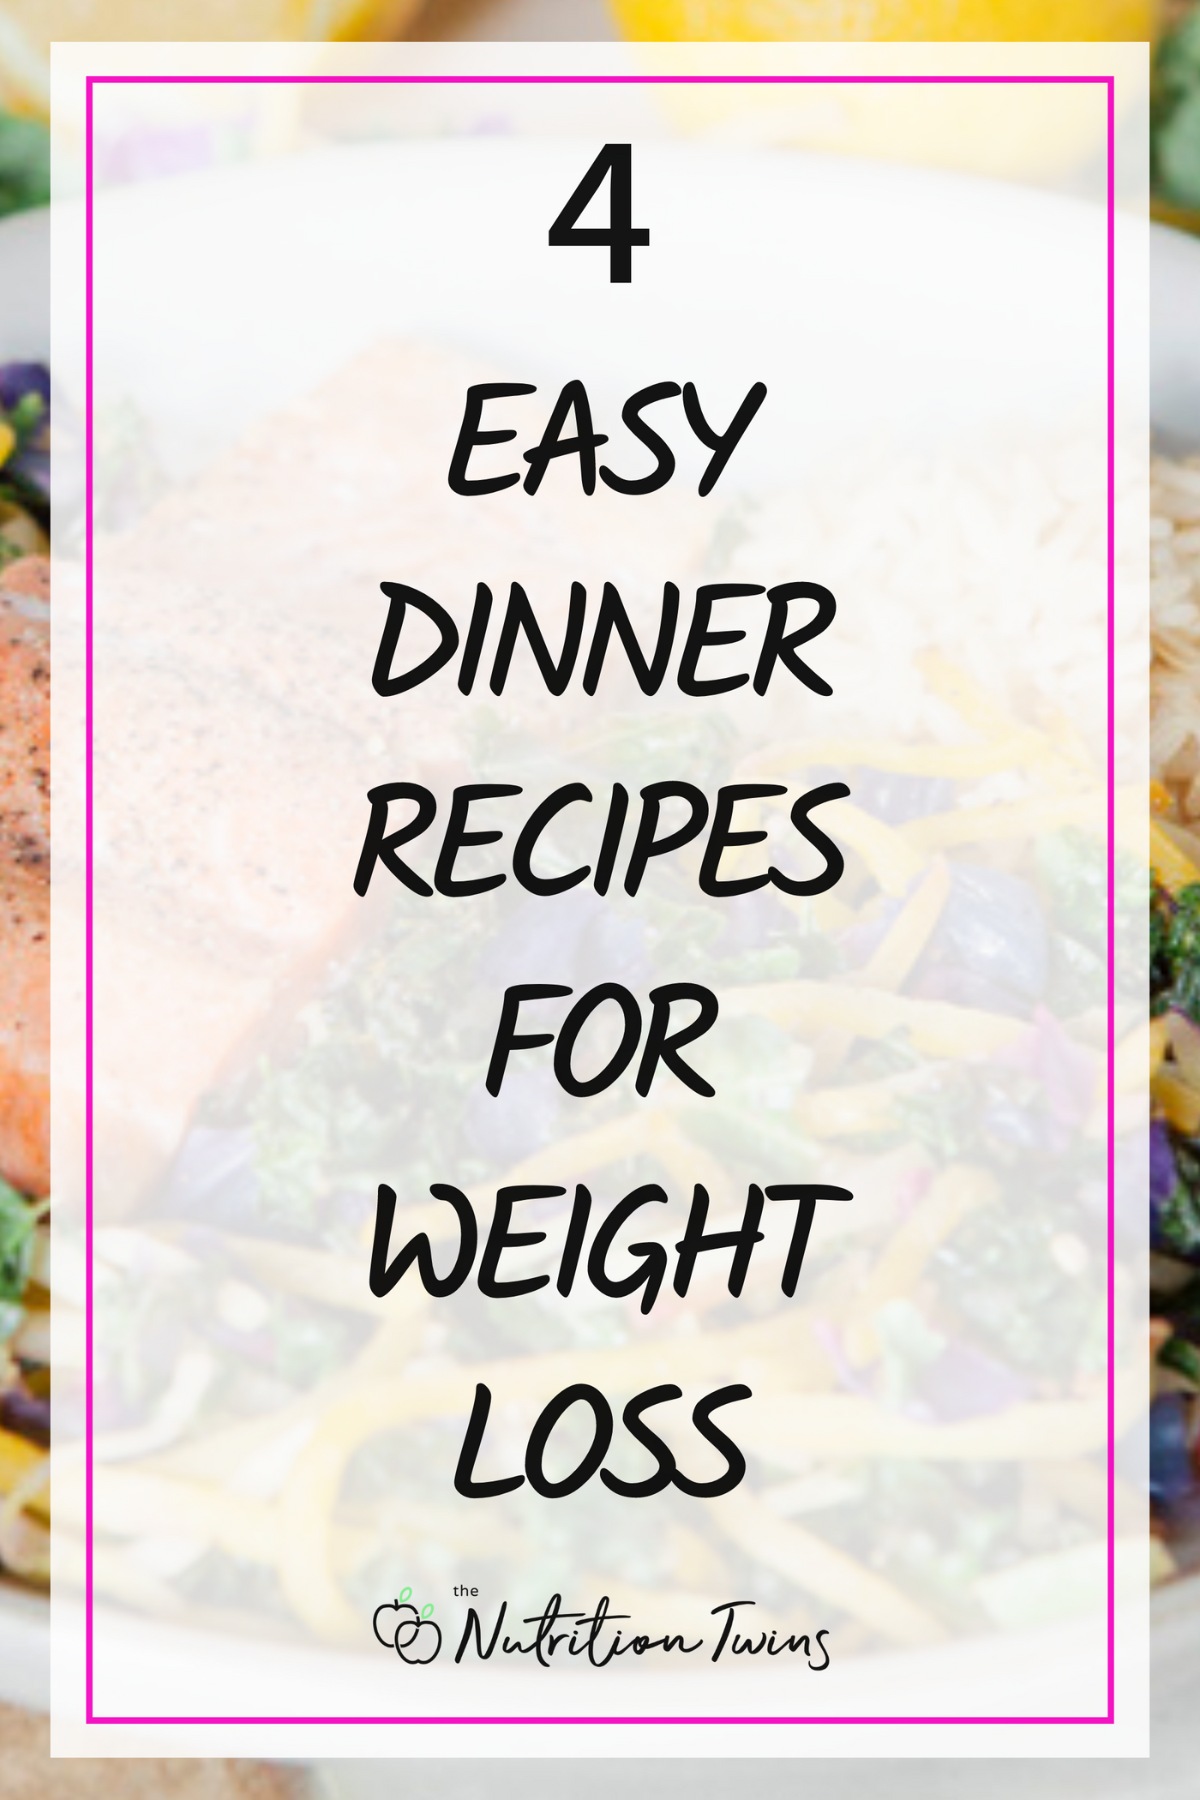 4 Easy Dinner Recipes For Weight Loss